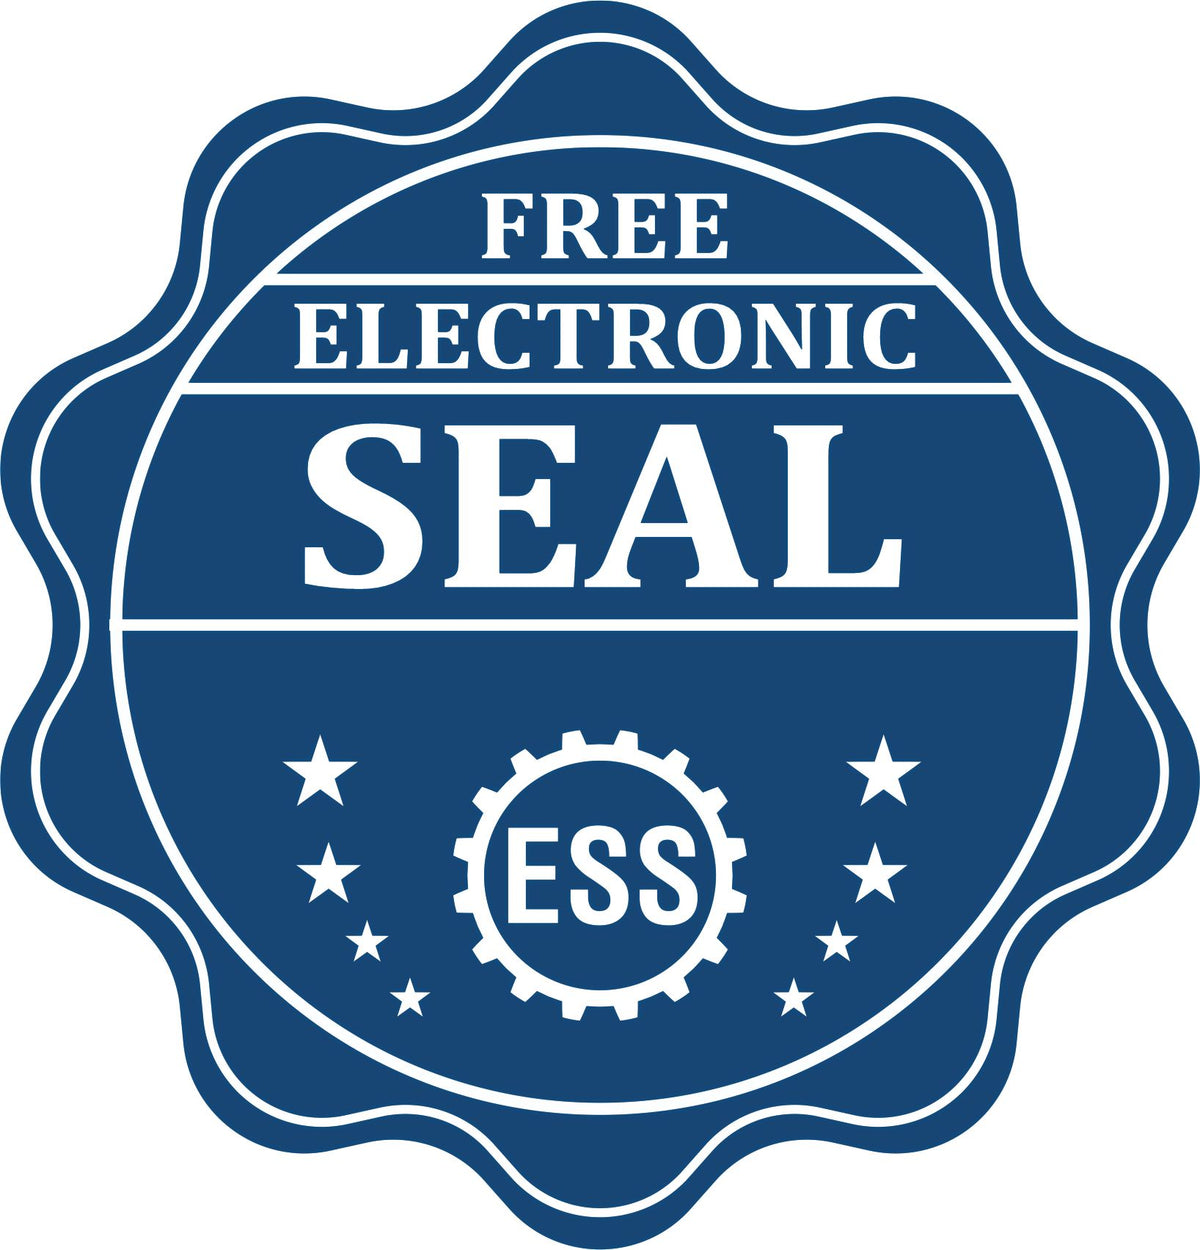 A badge showing a free electronic seal for the Long Reach Delaware PE Seal with stars and the ESS gear on the emblem.